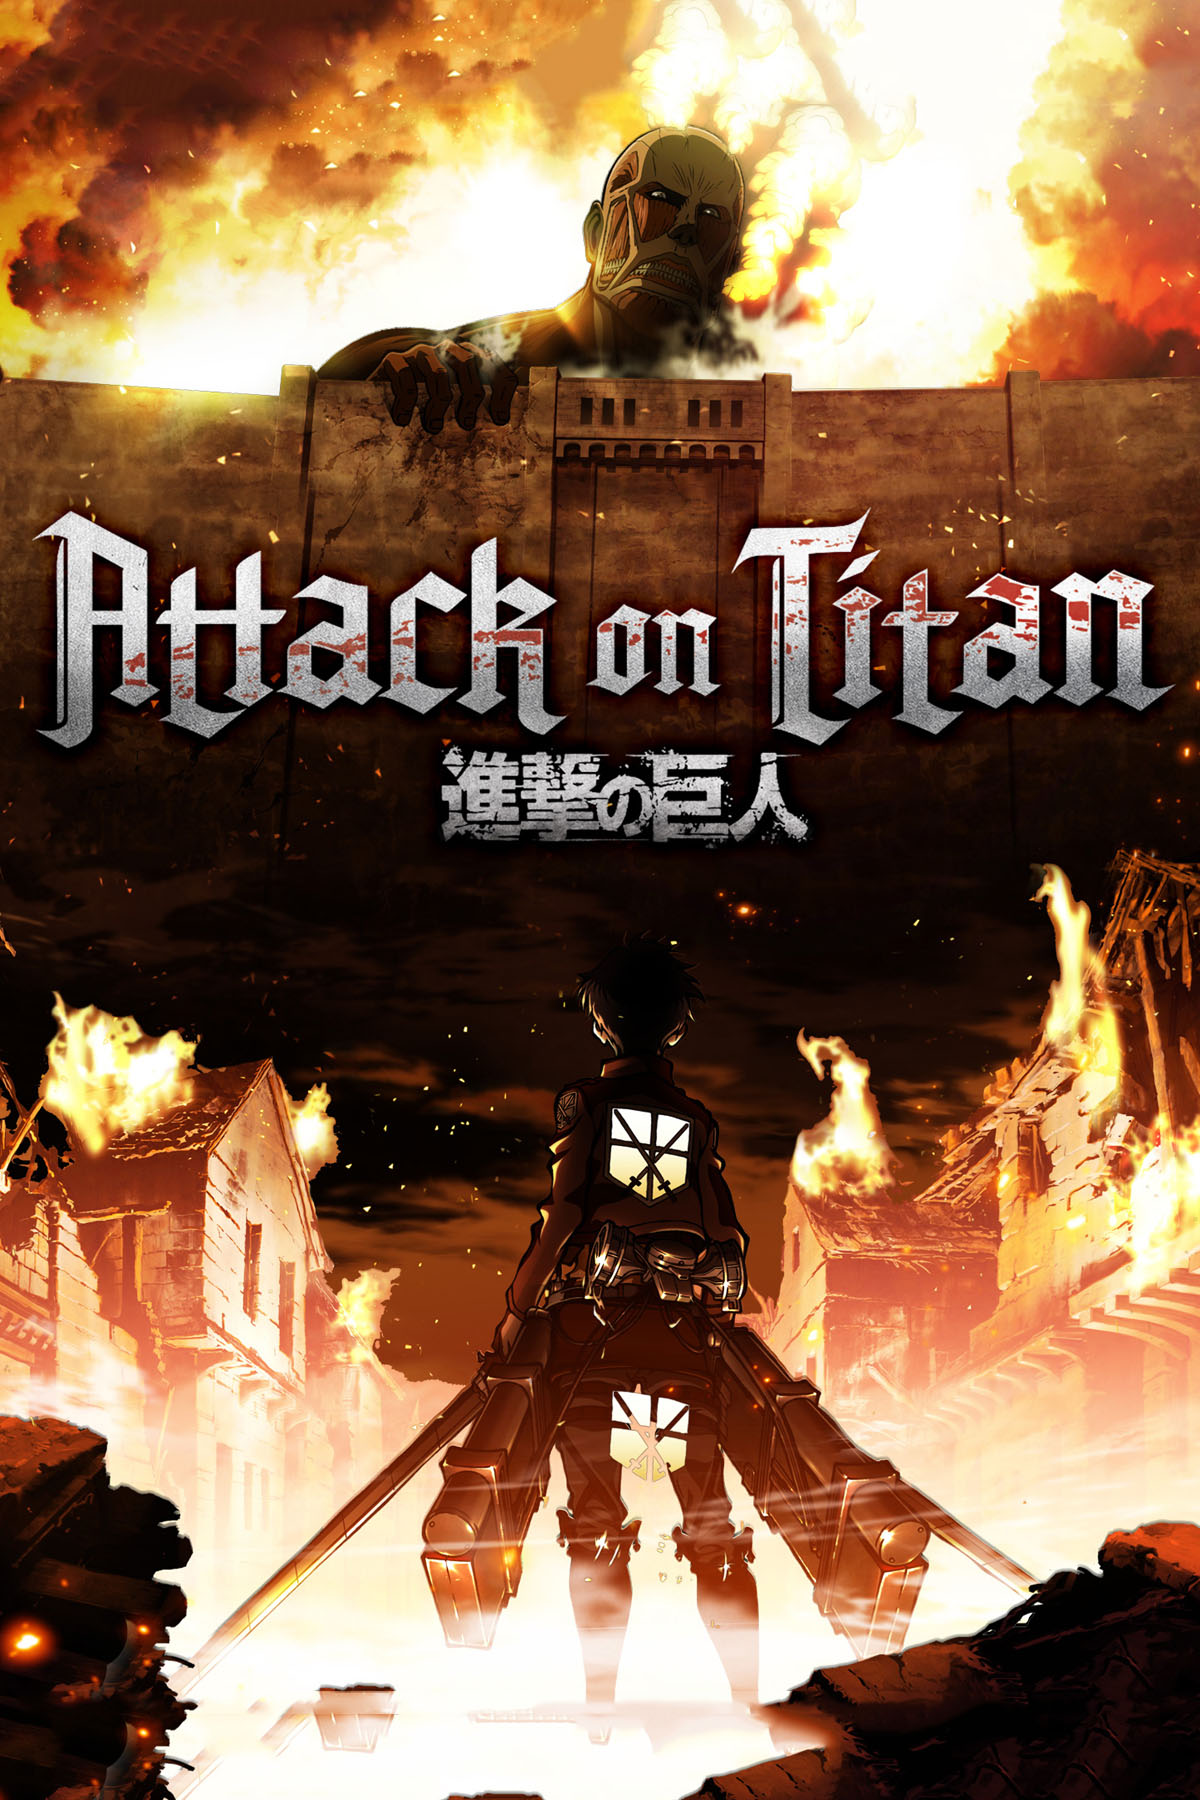 When Can You Watch and Stream the 'Attack on Titan' Series Finale?